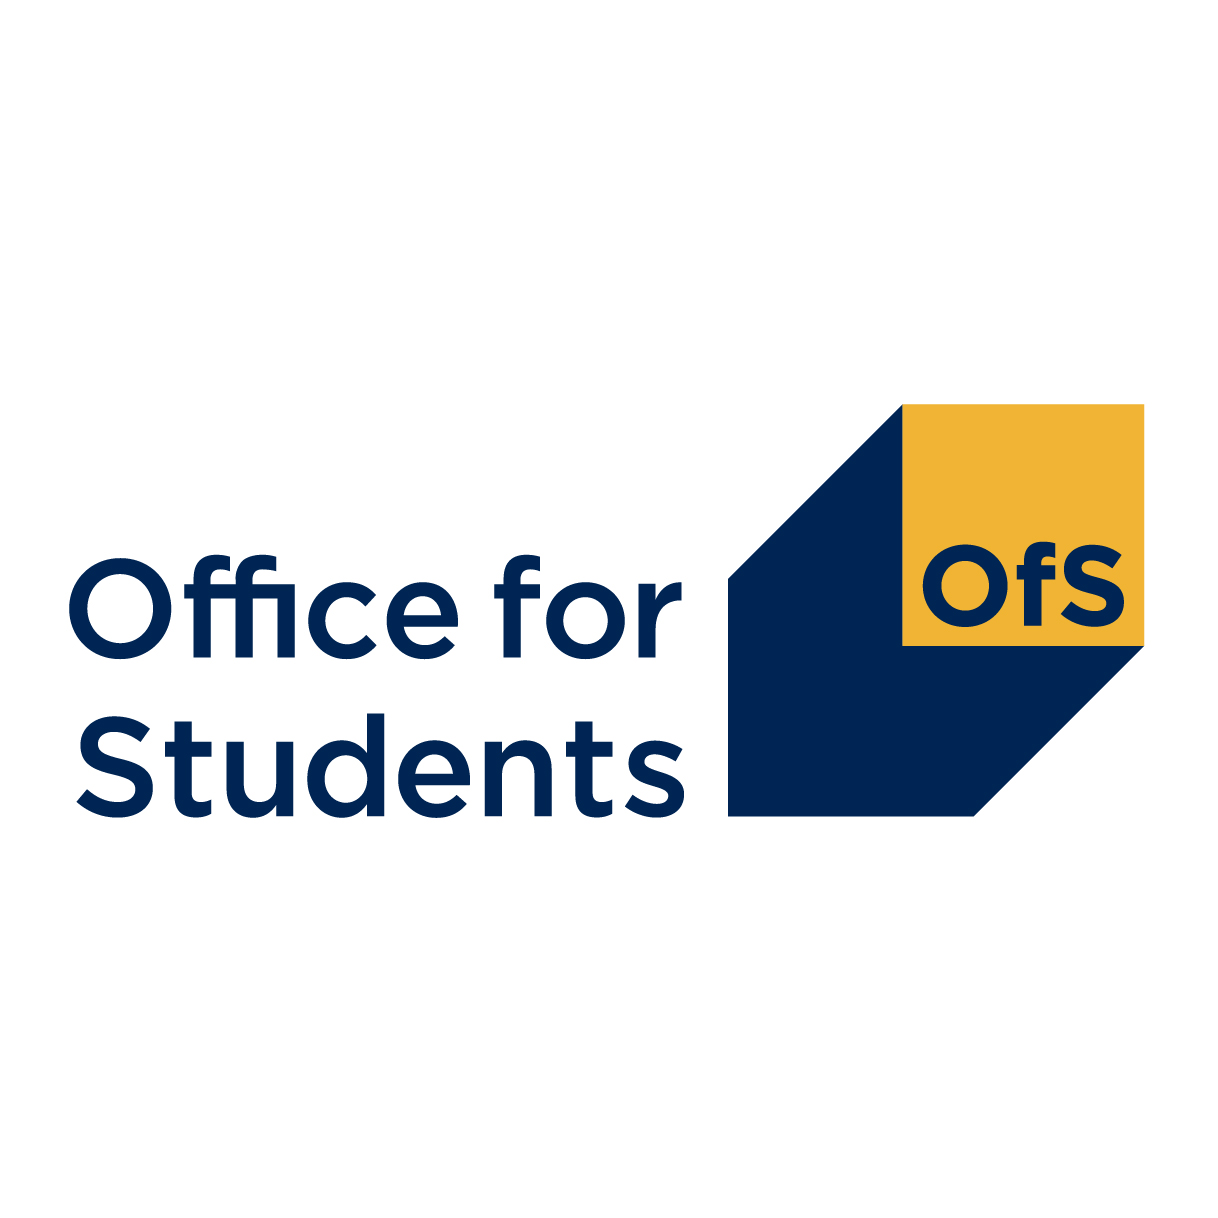 Office for Students logo with words office for students on the left and a box on the right